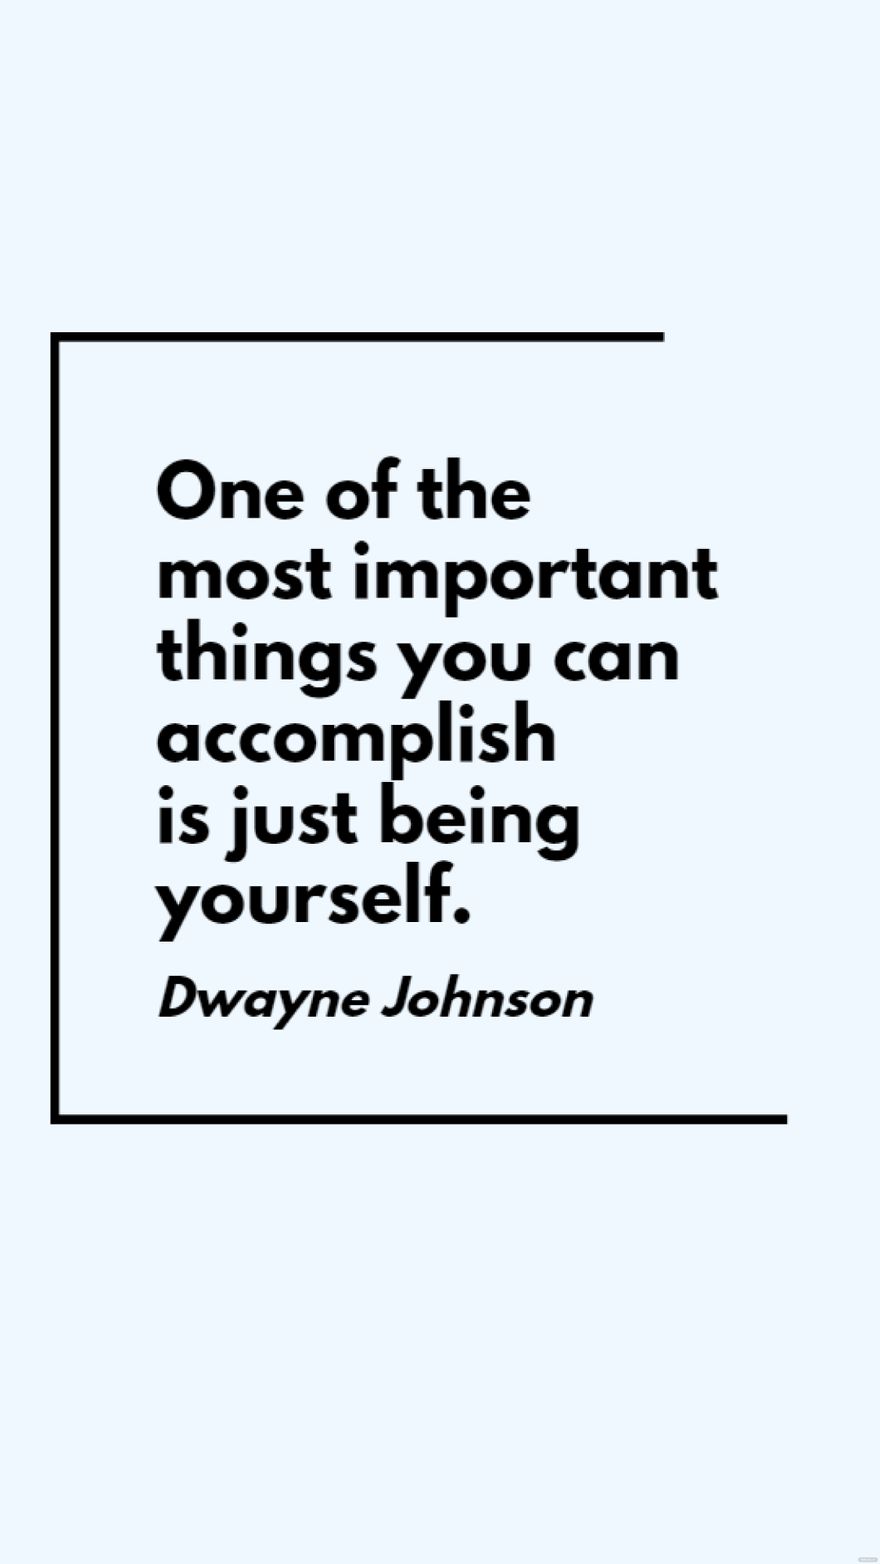 Dwayne "The Rock" Johnson - One of the most important things you can accomplish is just being yourself.